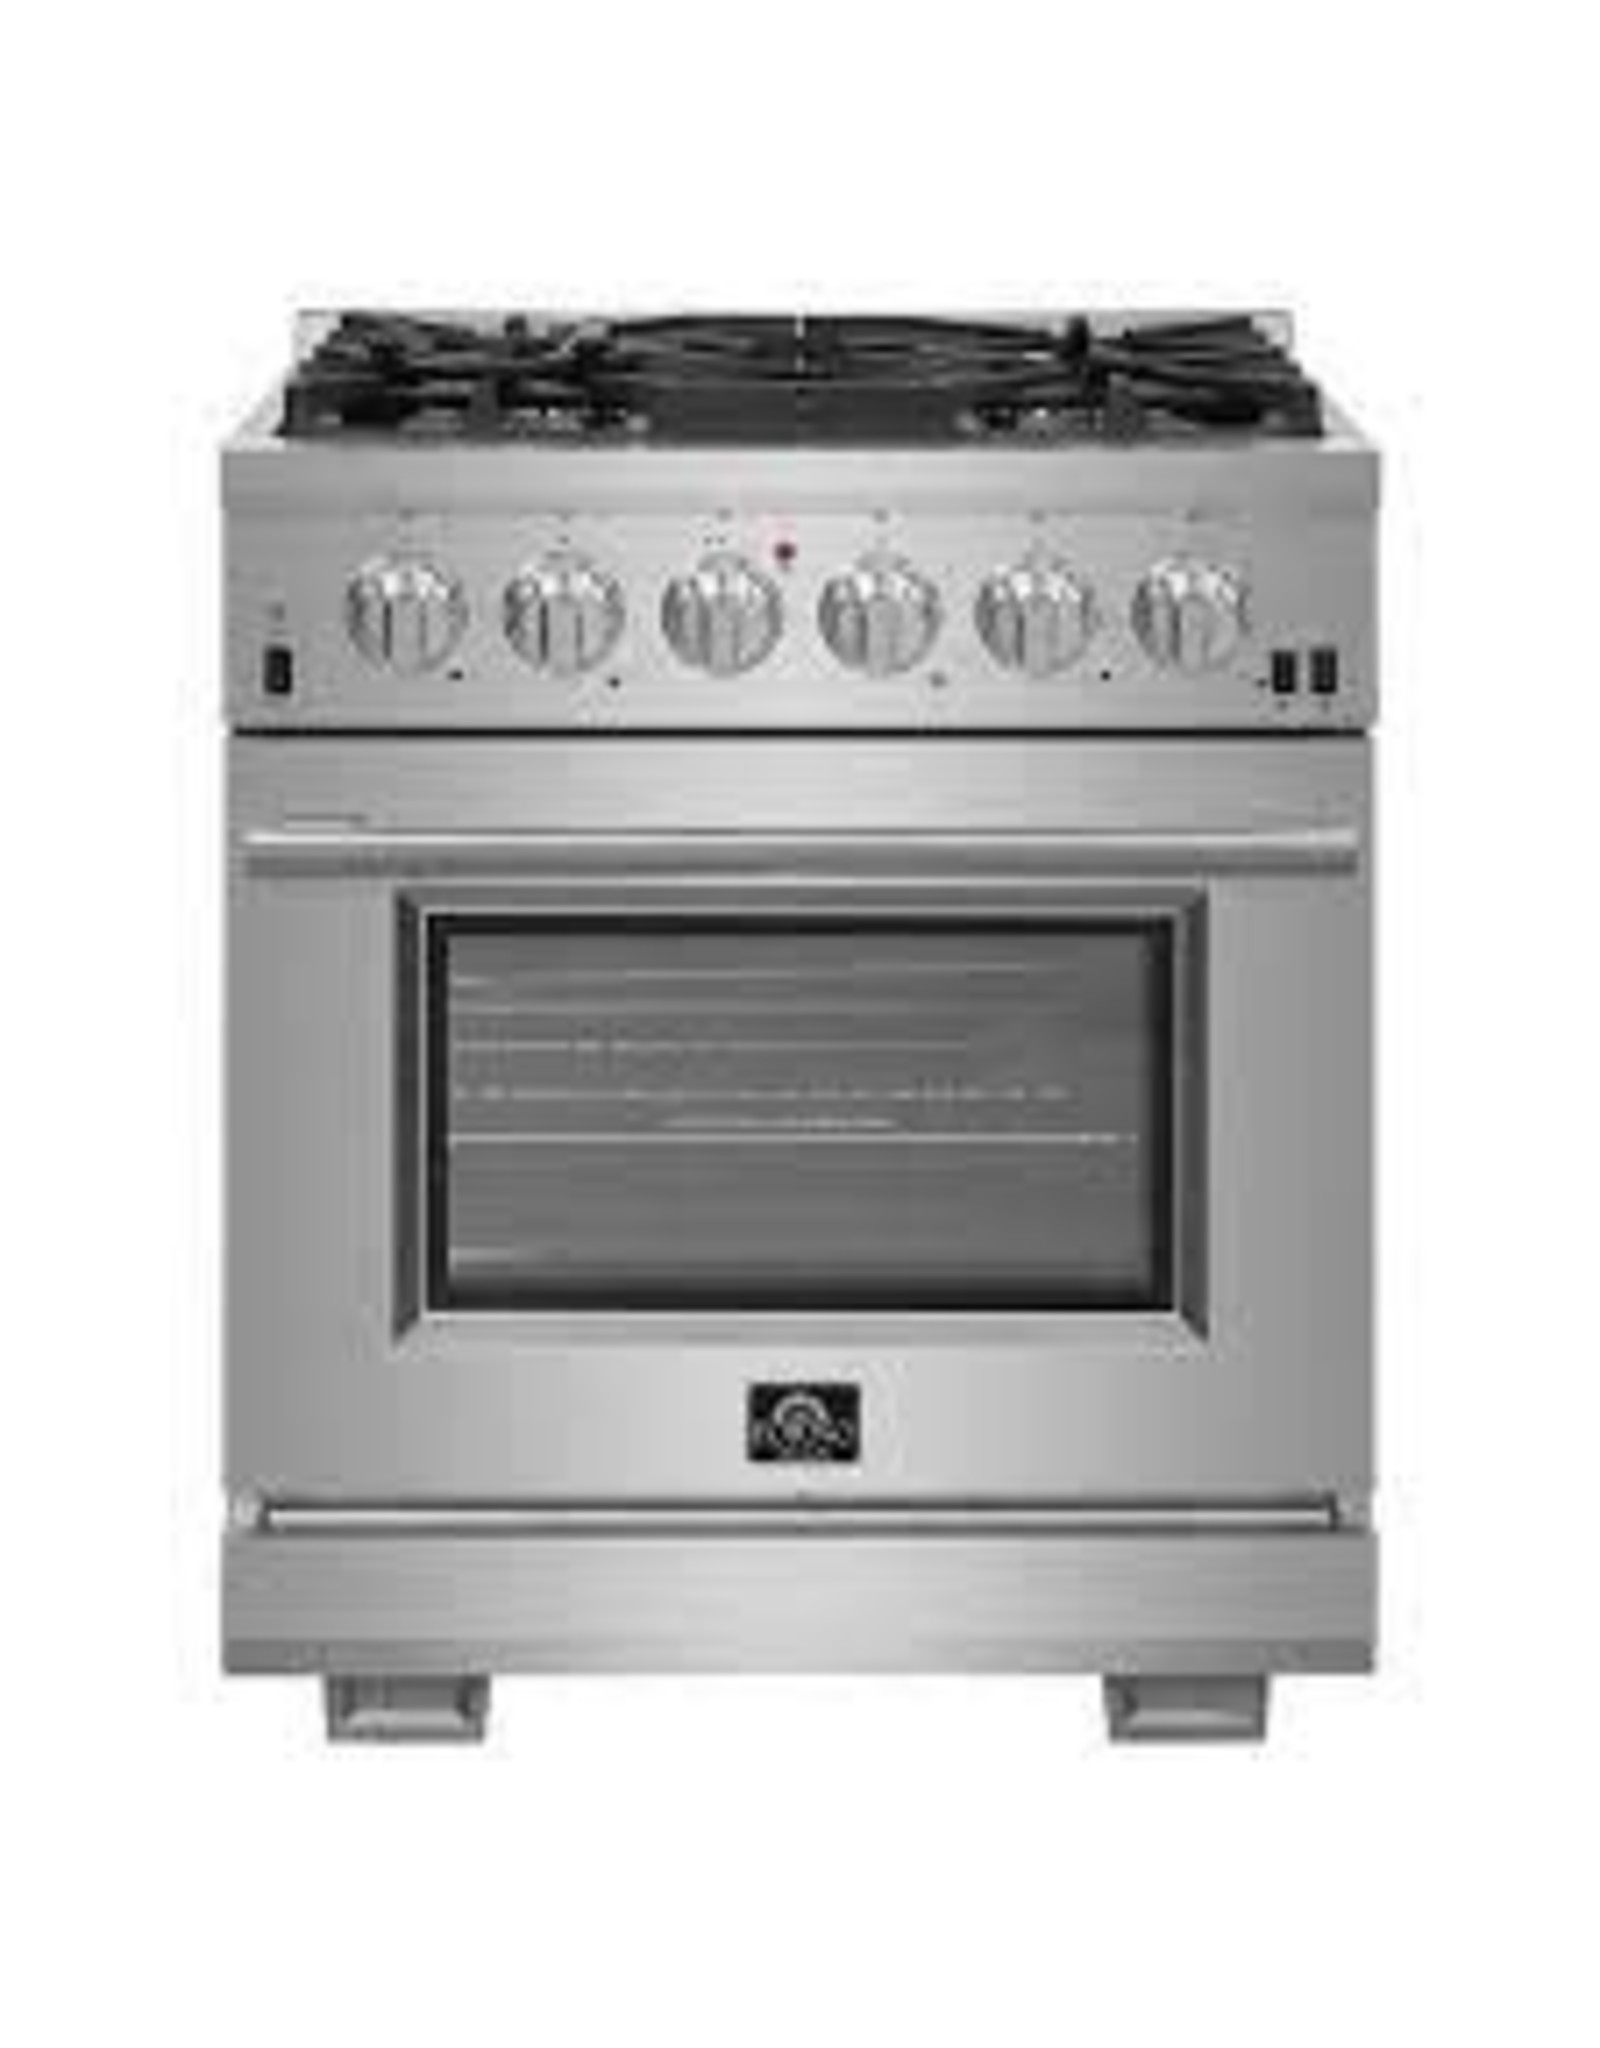 FFSGS6260-30 Forno Capriasca 30 in. 4.32 cu. ft. Gas Range with 5 Gas Burners Oven in Stainless Steel